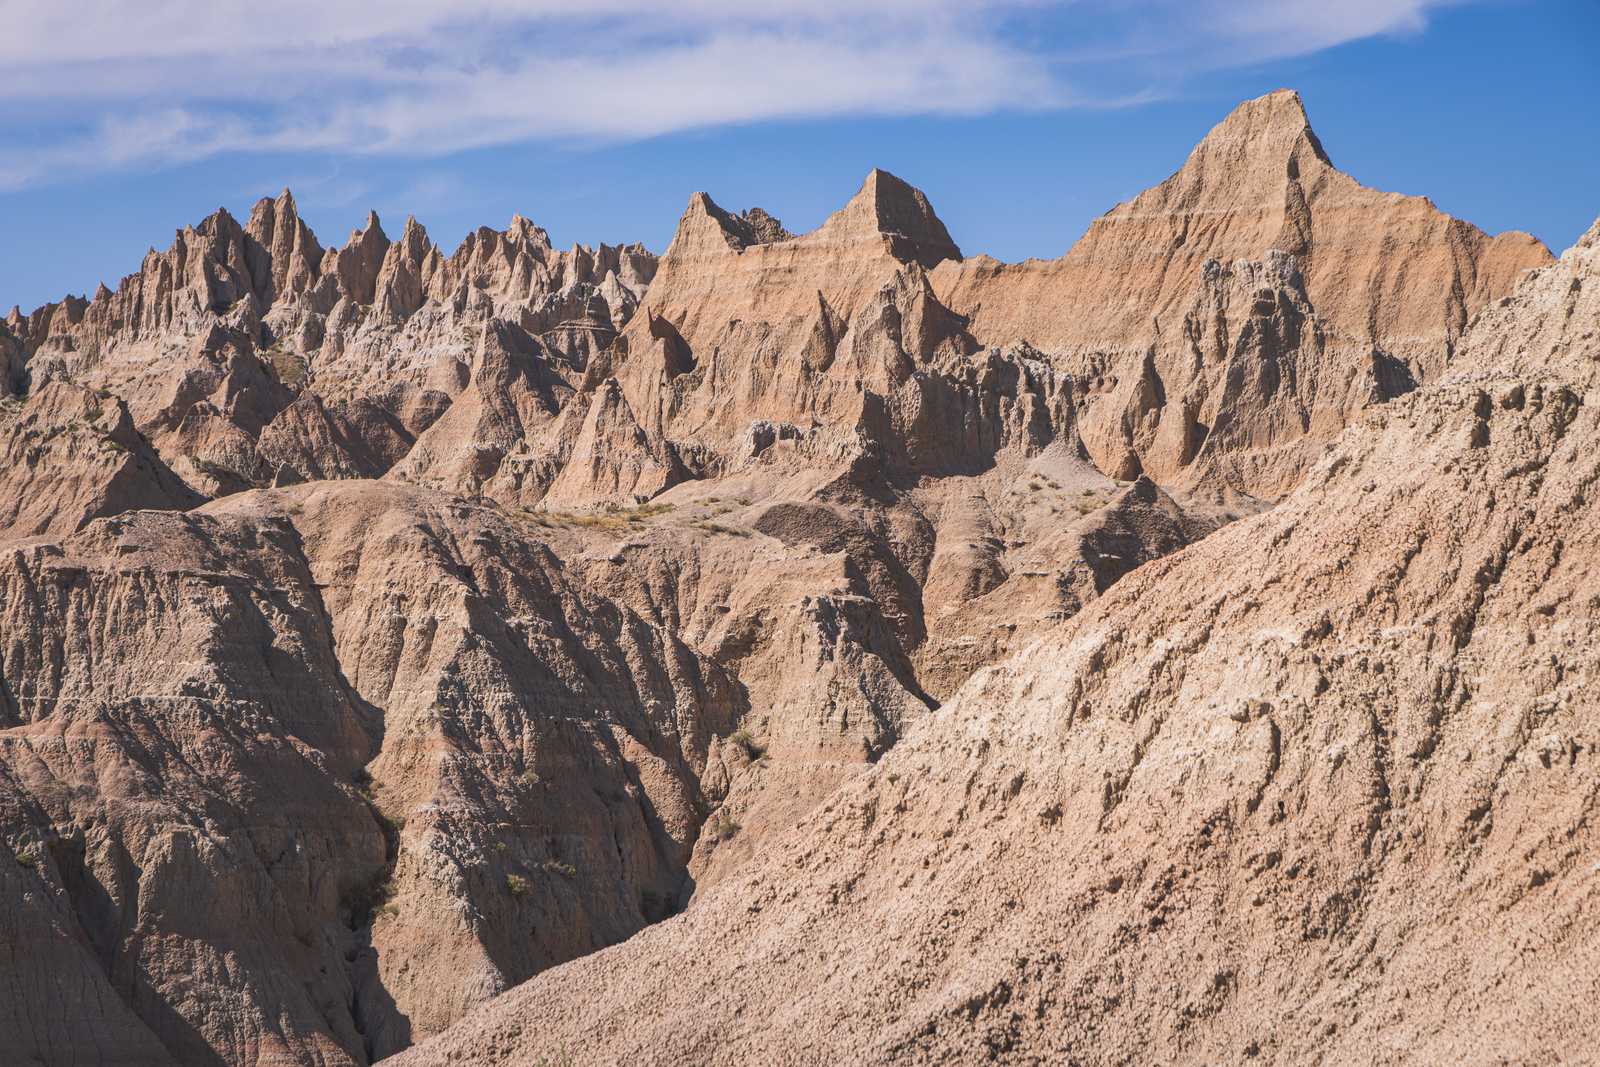 Mountains of smooth, tan sedimentary rock form sharp formations as they stretch high into the sky